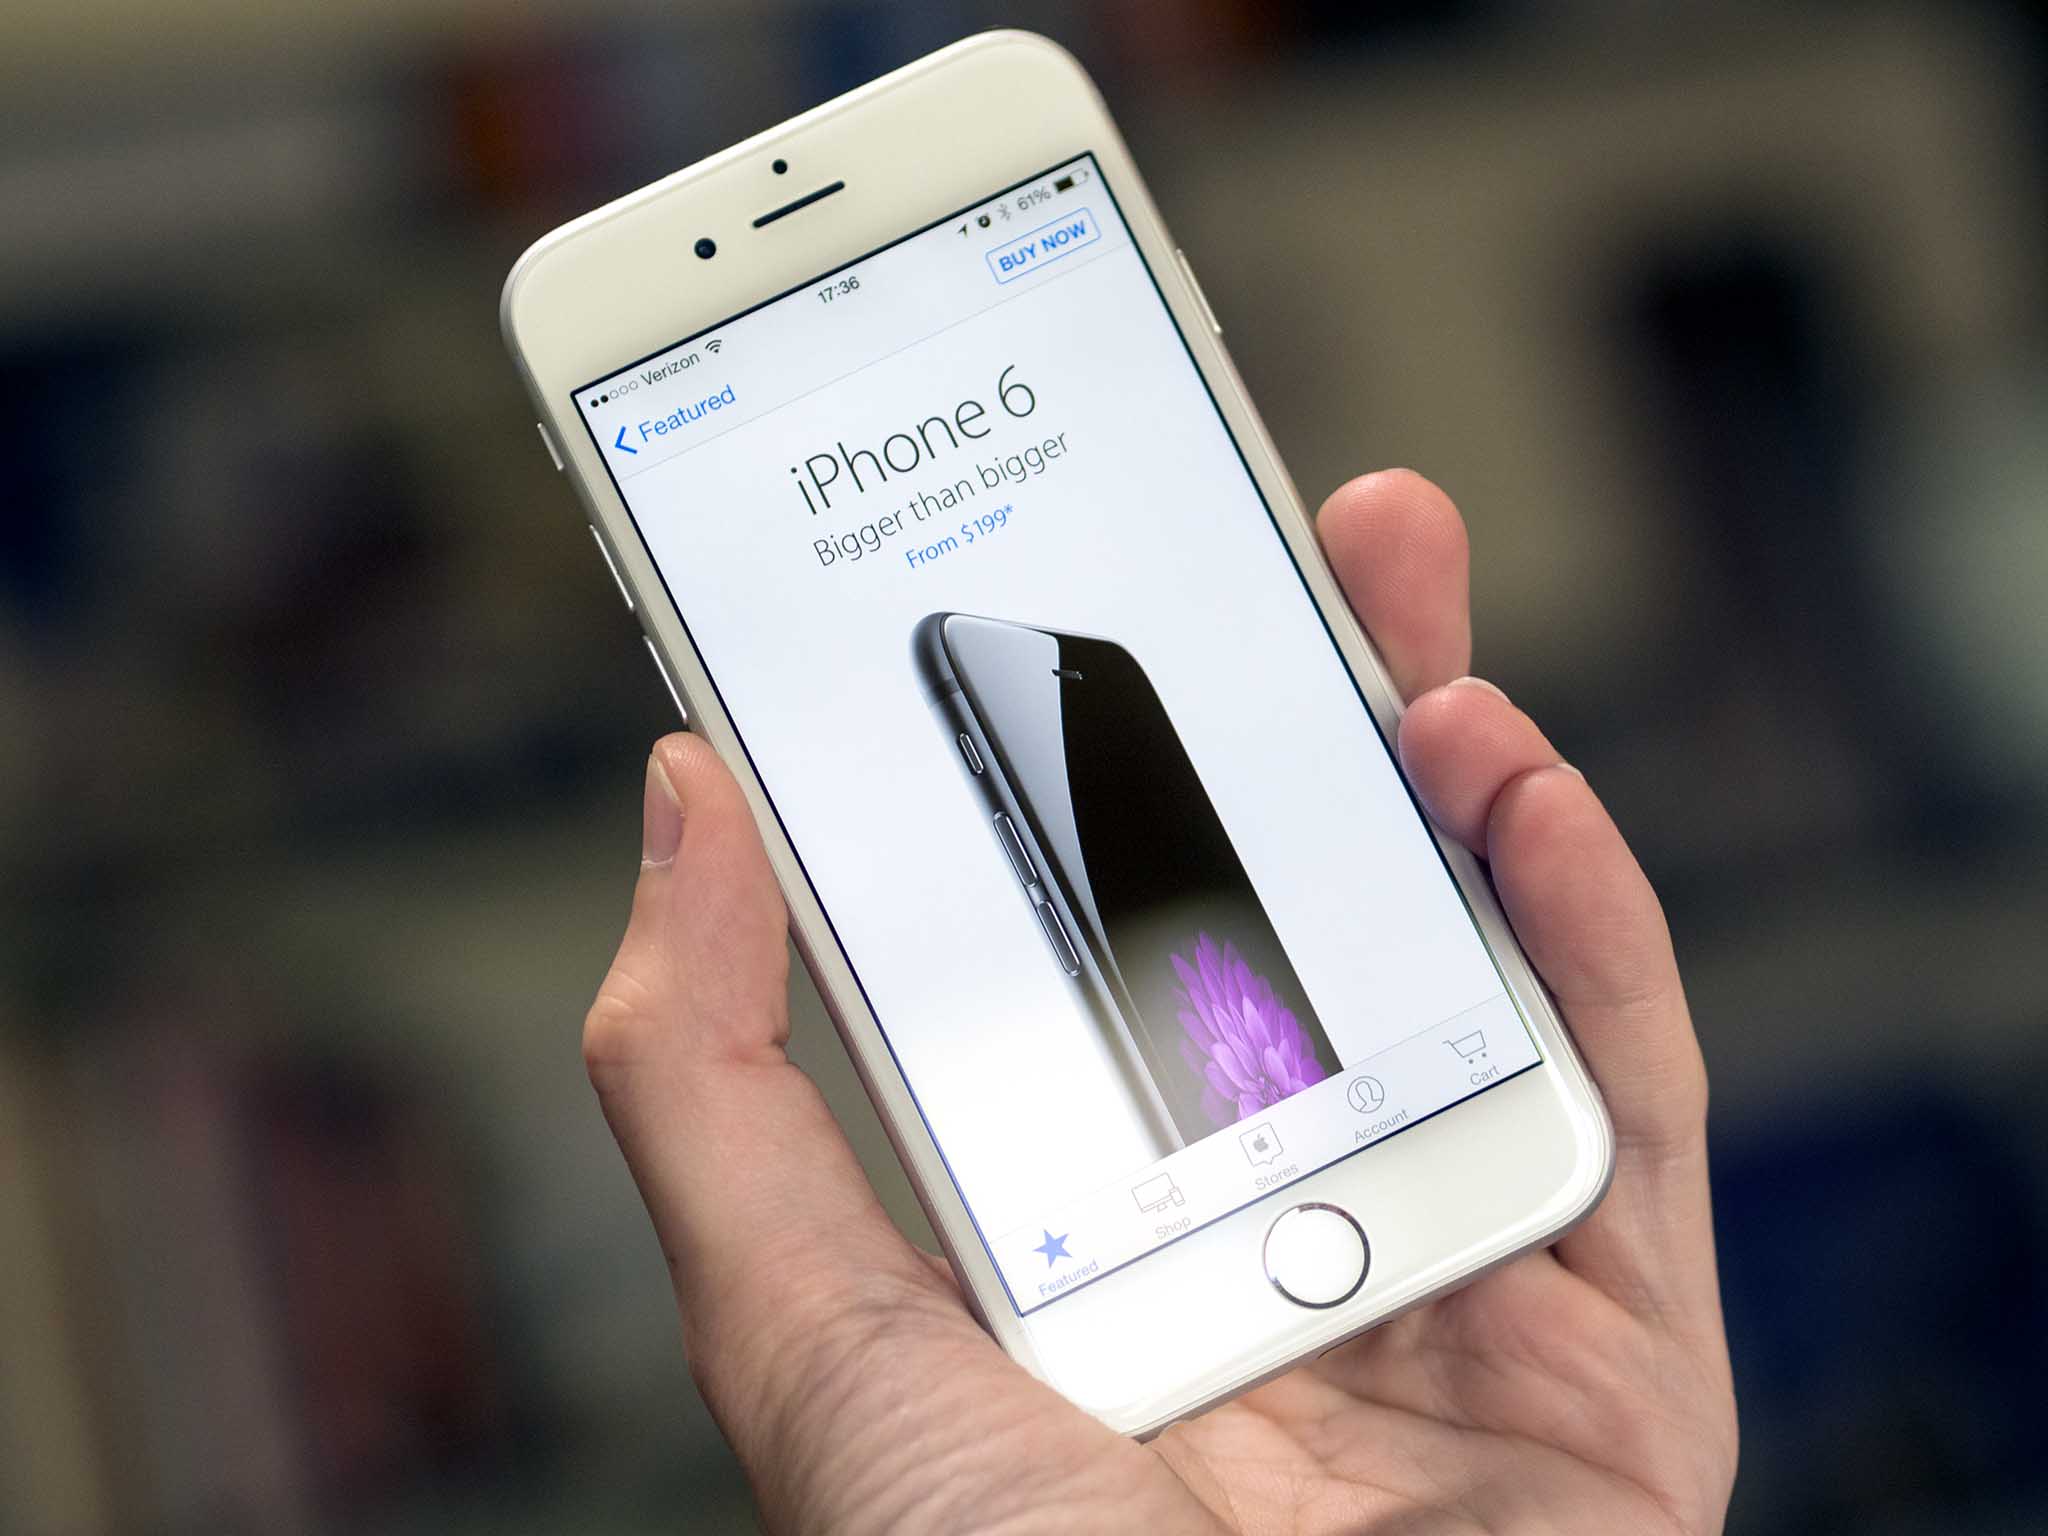 Apple Store app gets iPhone 6 optimizations in latest update | iMore